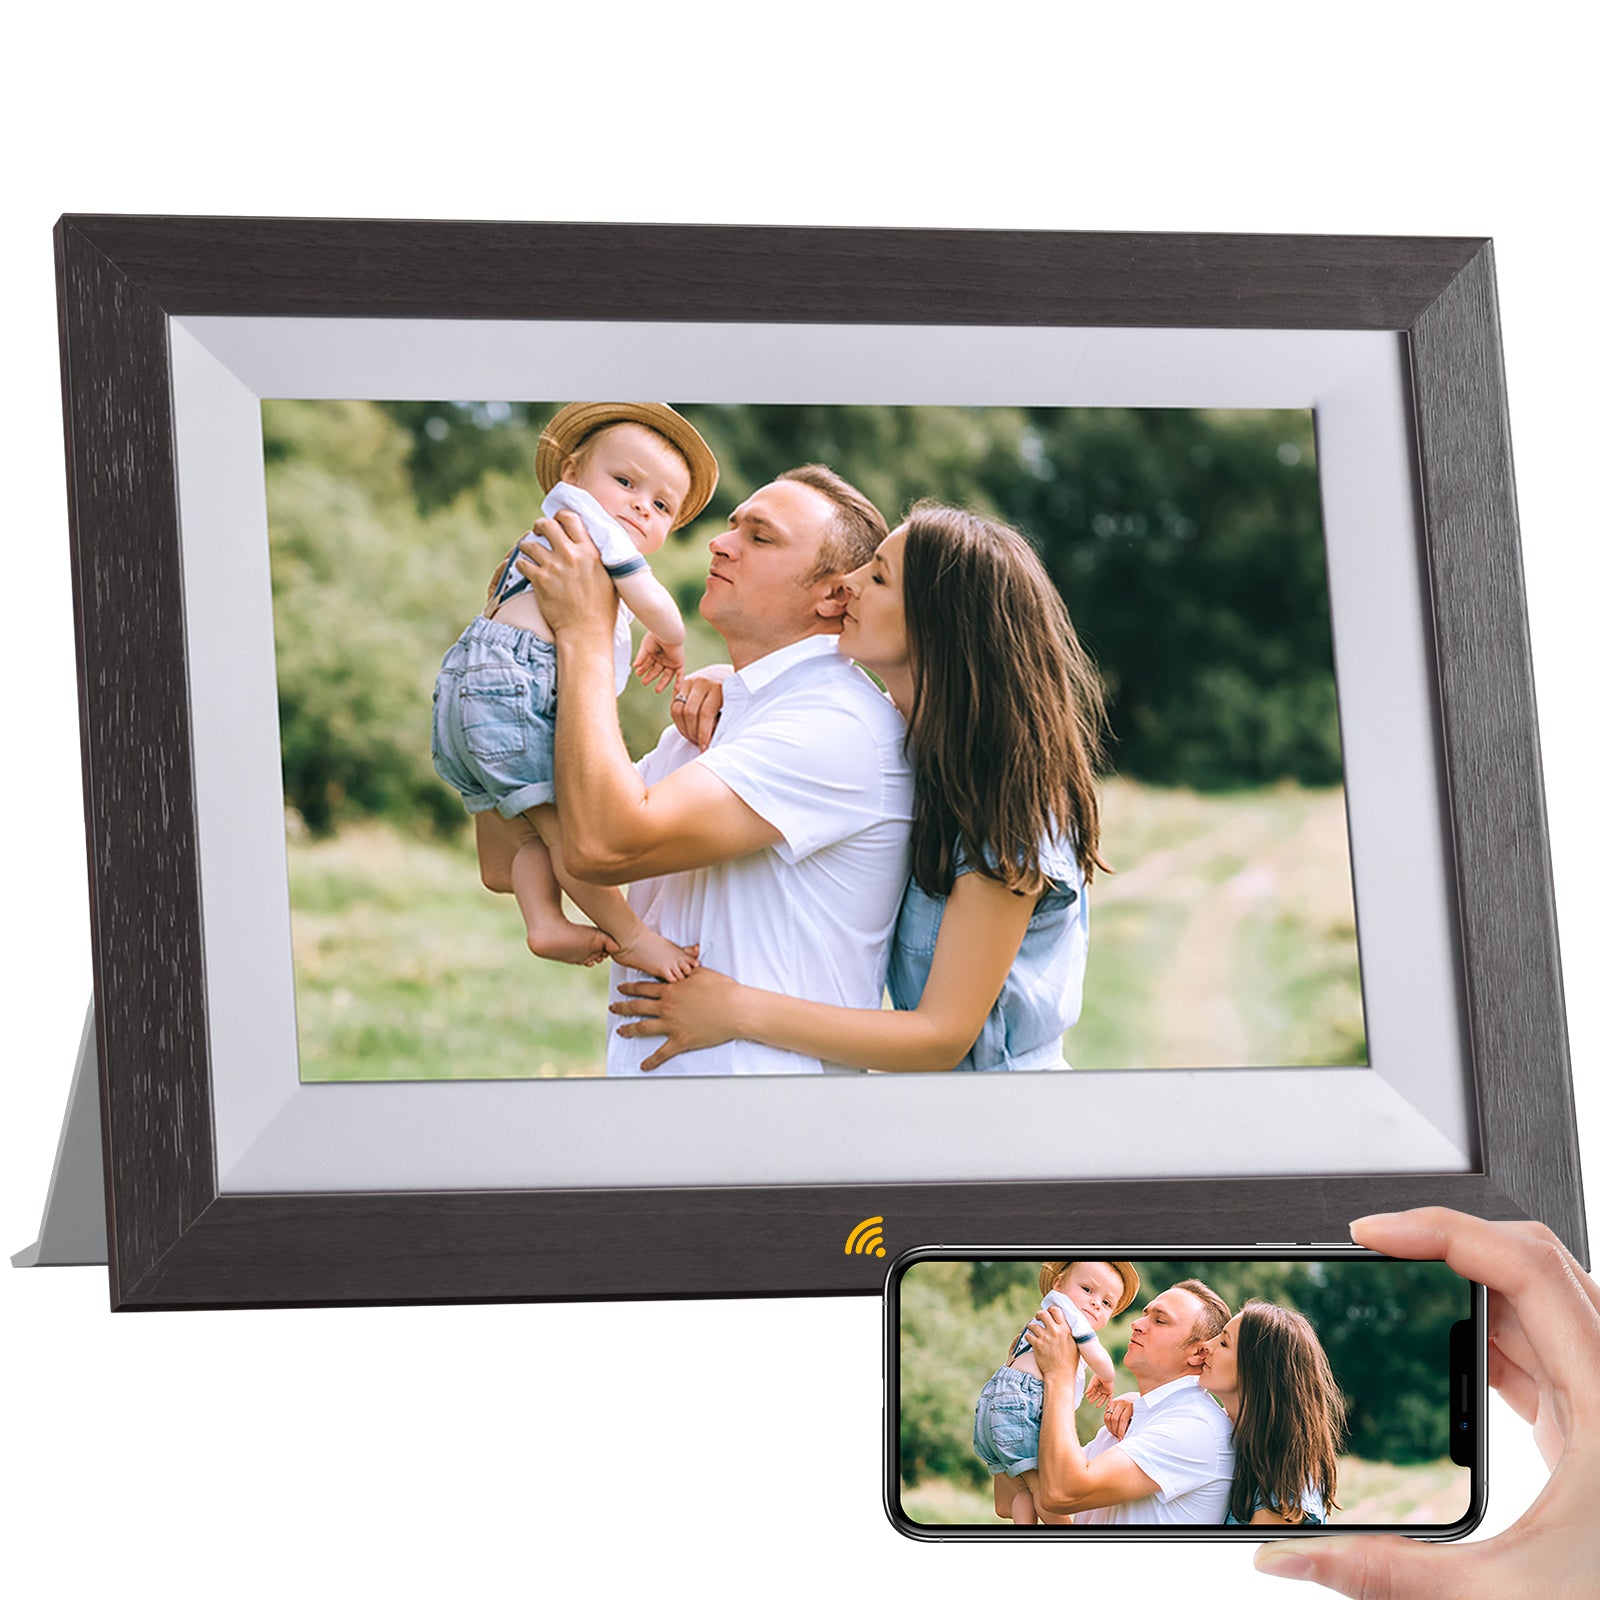 Kodak Classic Wooden Digital Photo Frame 1012W, 10.1 inch Touchscreen, WiFi Enabled, 16GB Internal Memory extendable with Memory Card (Black)